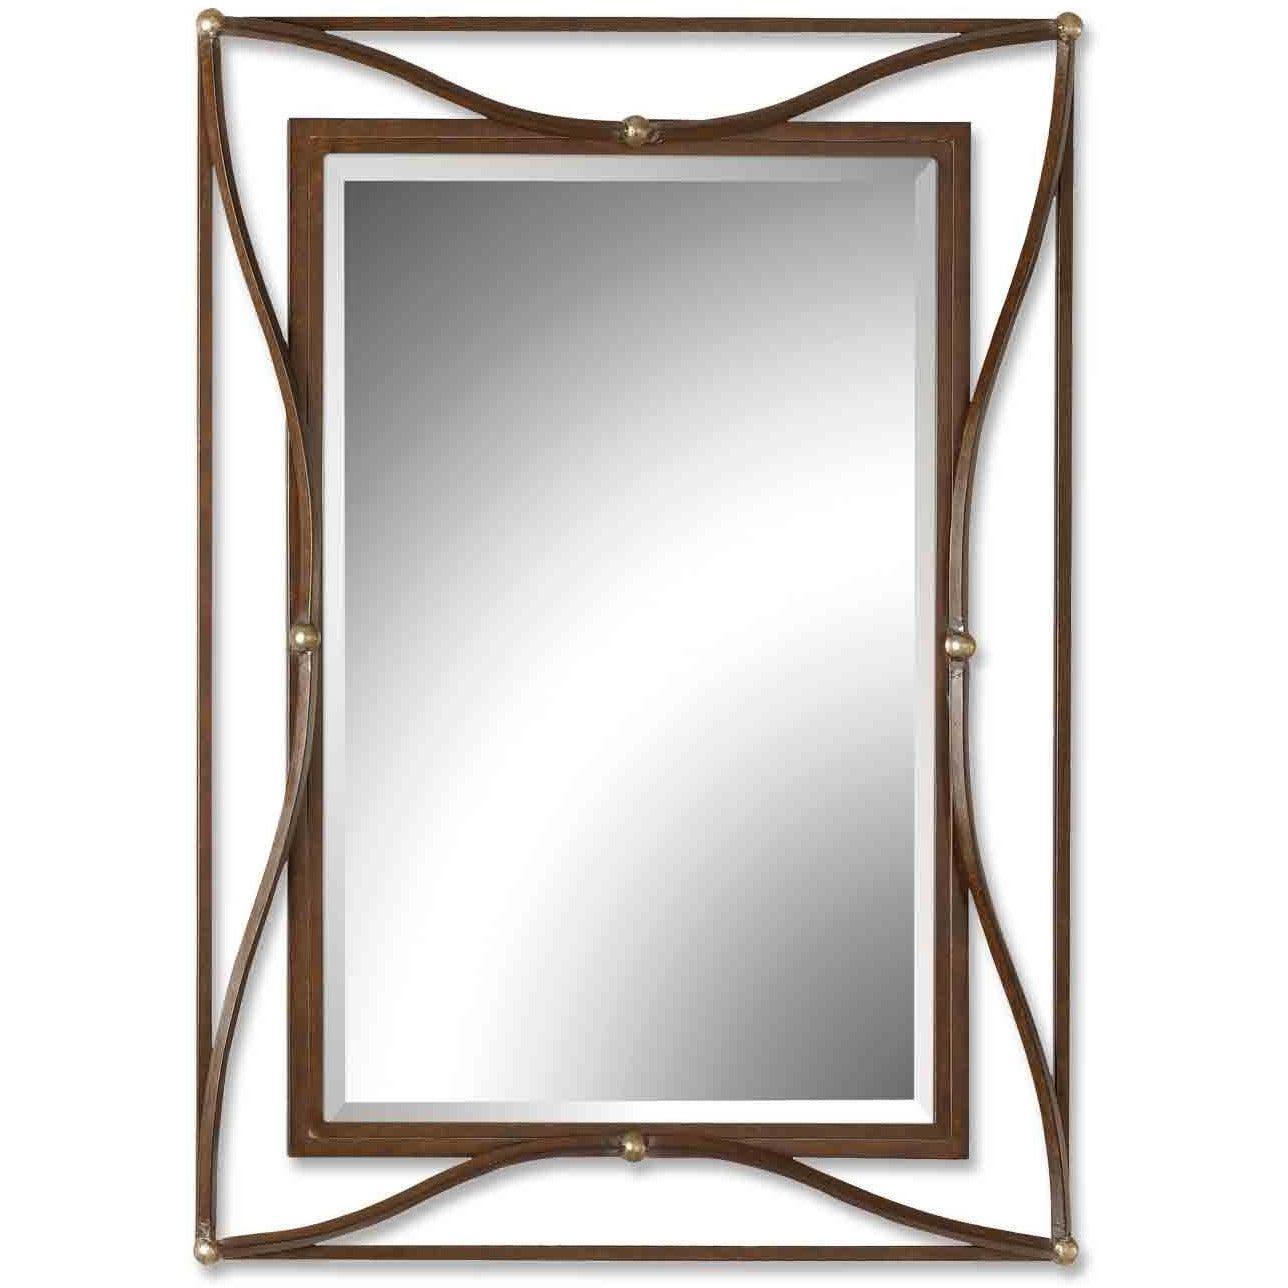 The Uttermost - Thierry Mirror - 11547B | Montreal Lighting & Hardware